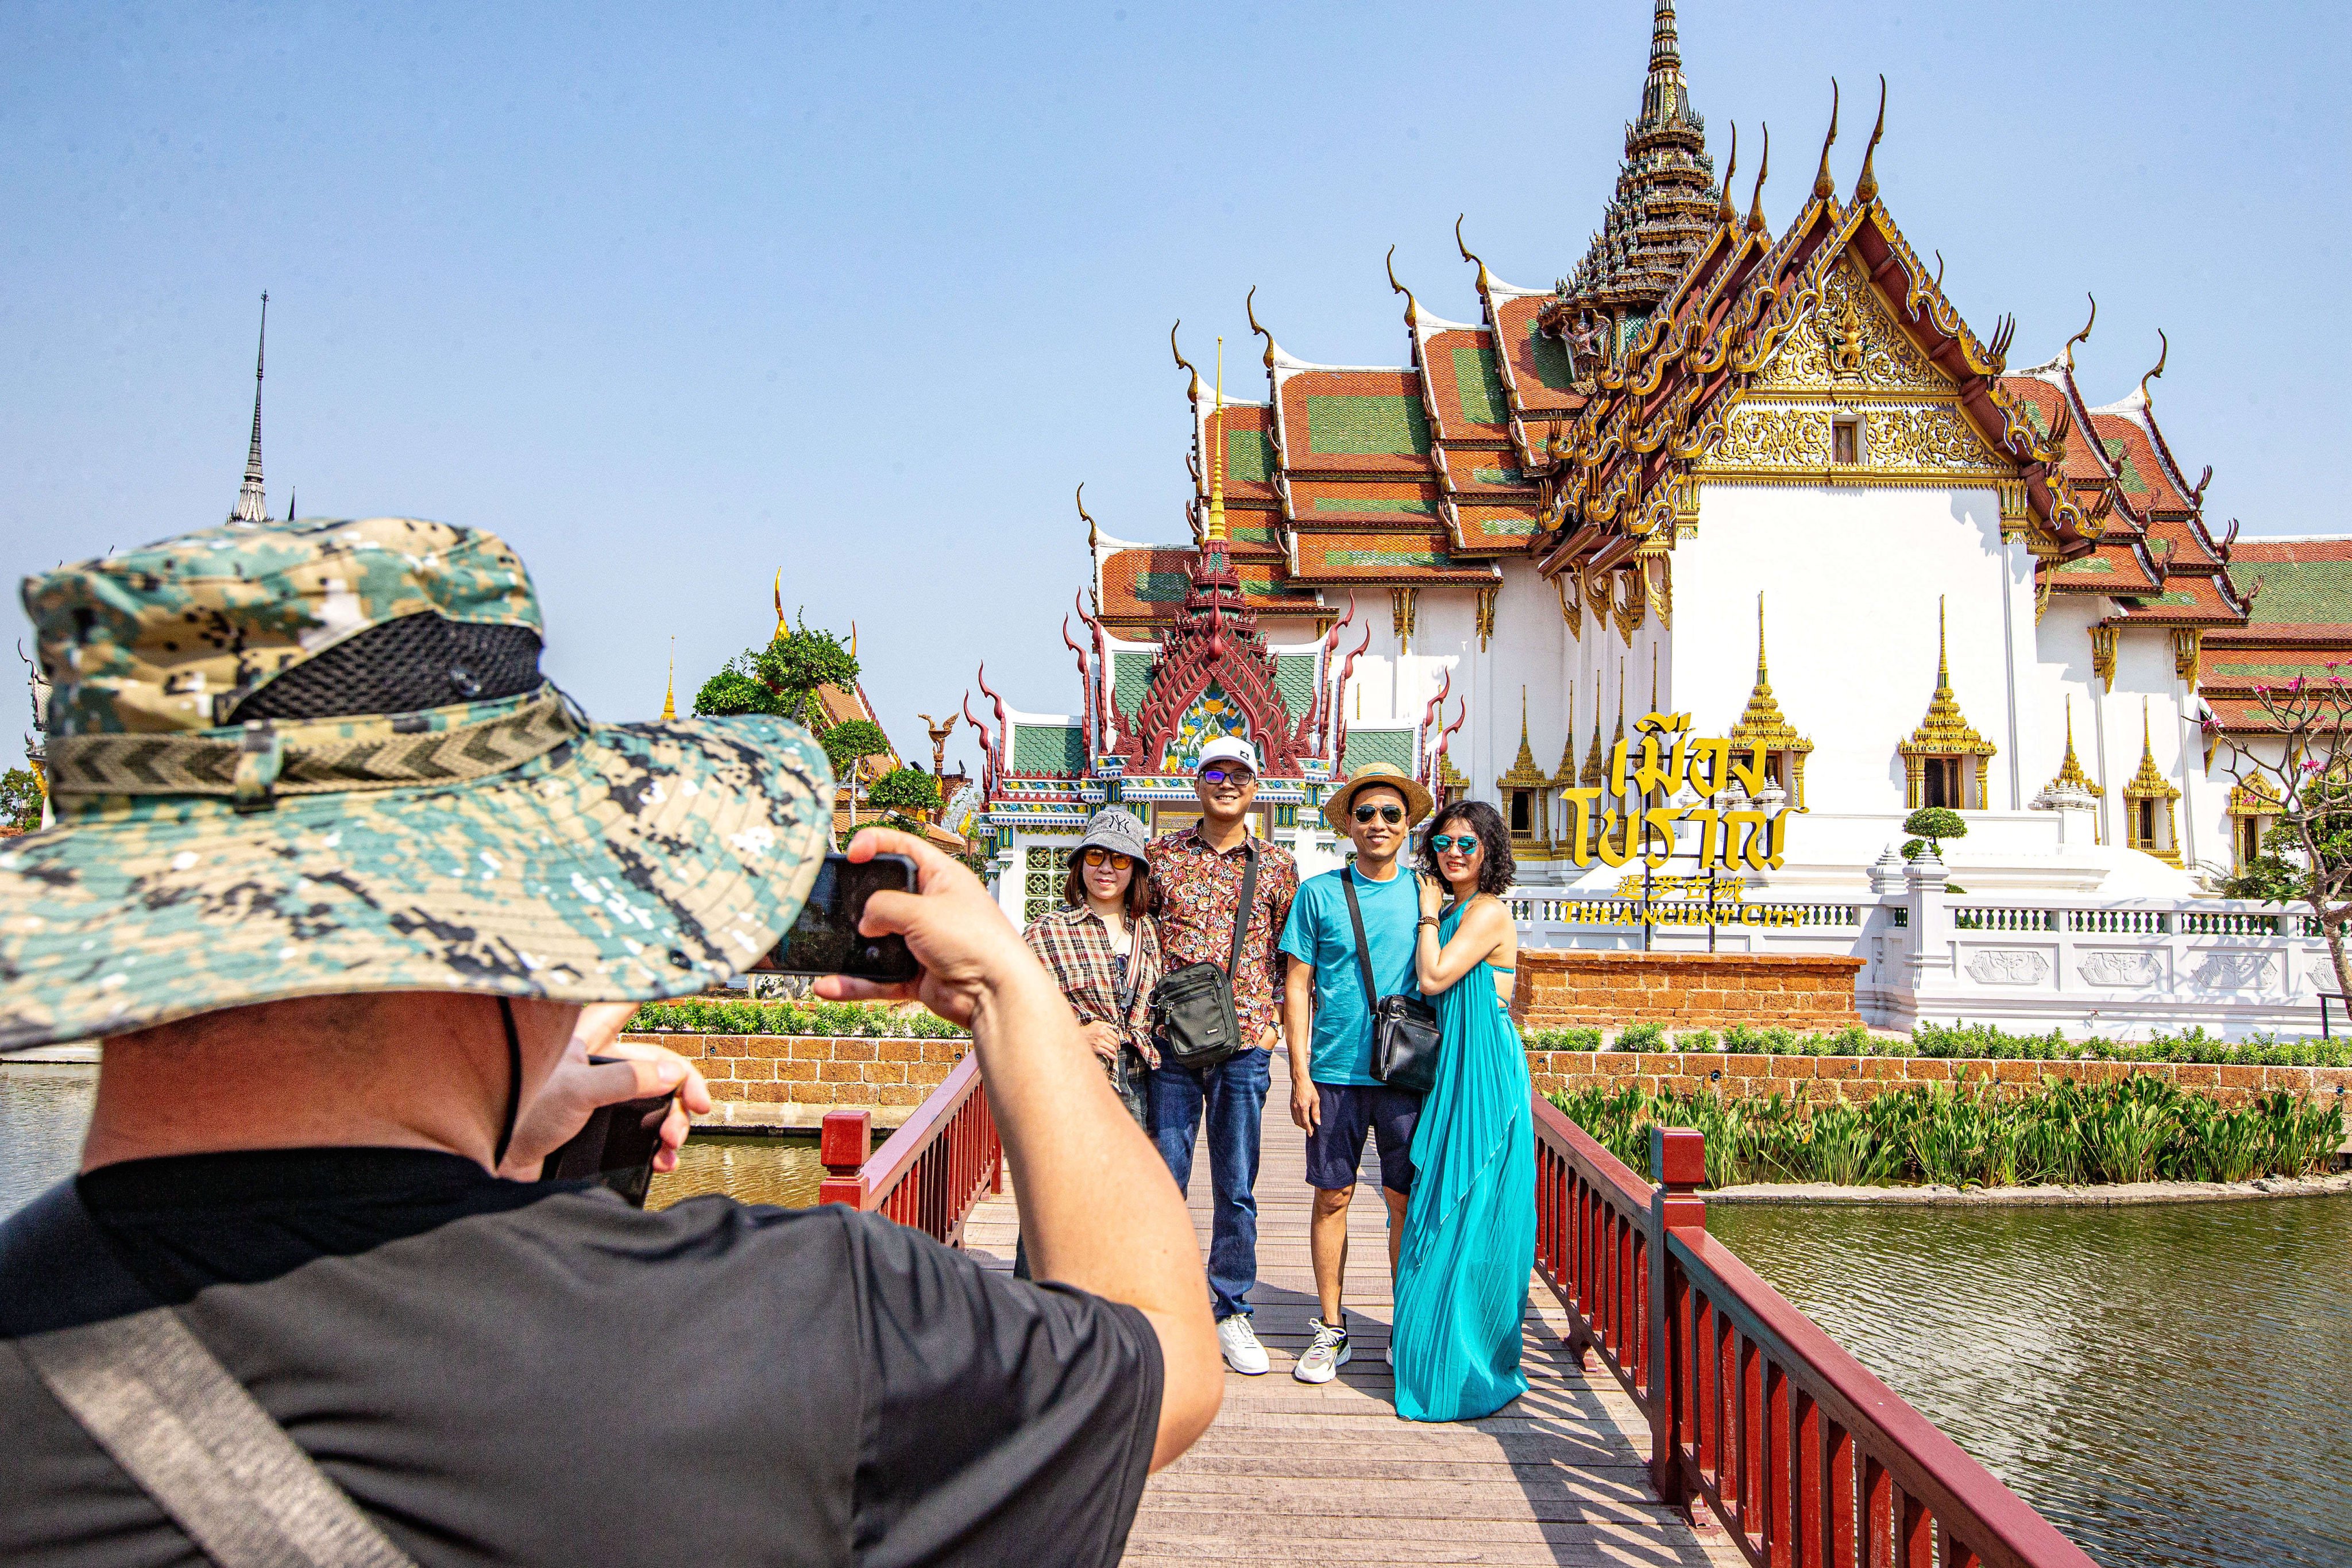 Chinese tourists pose for a group photo at a museum in Samut Prakan, Thailand, on March 1. Photo: Xinhua